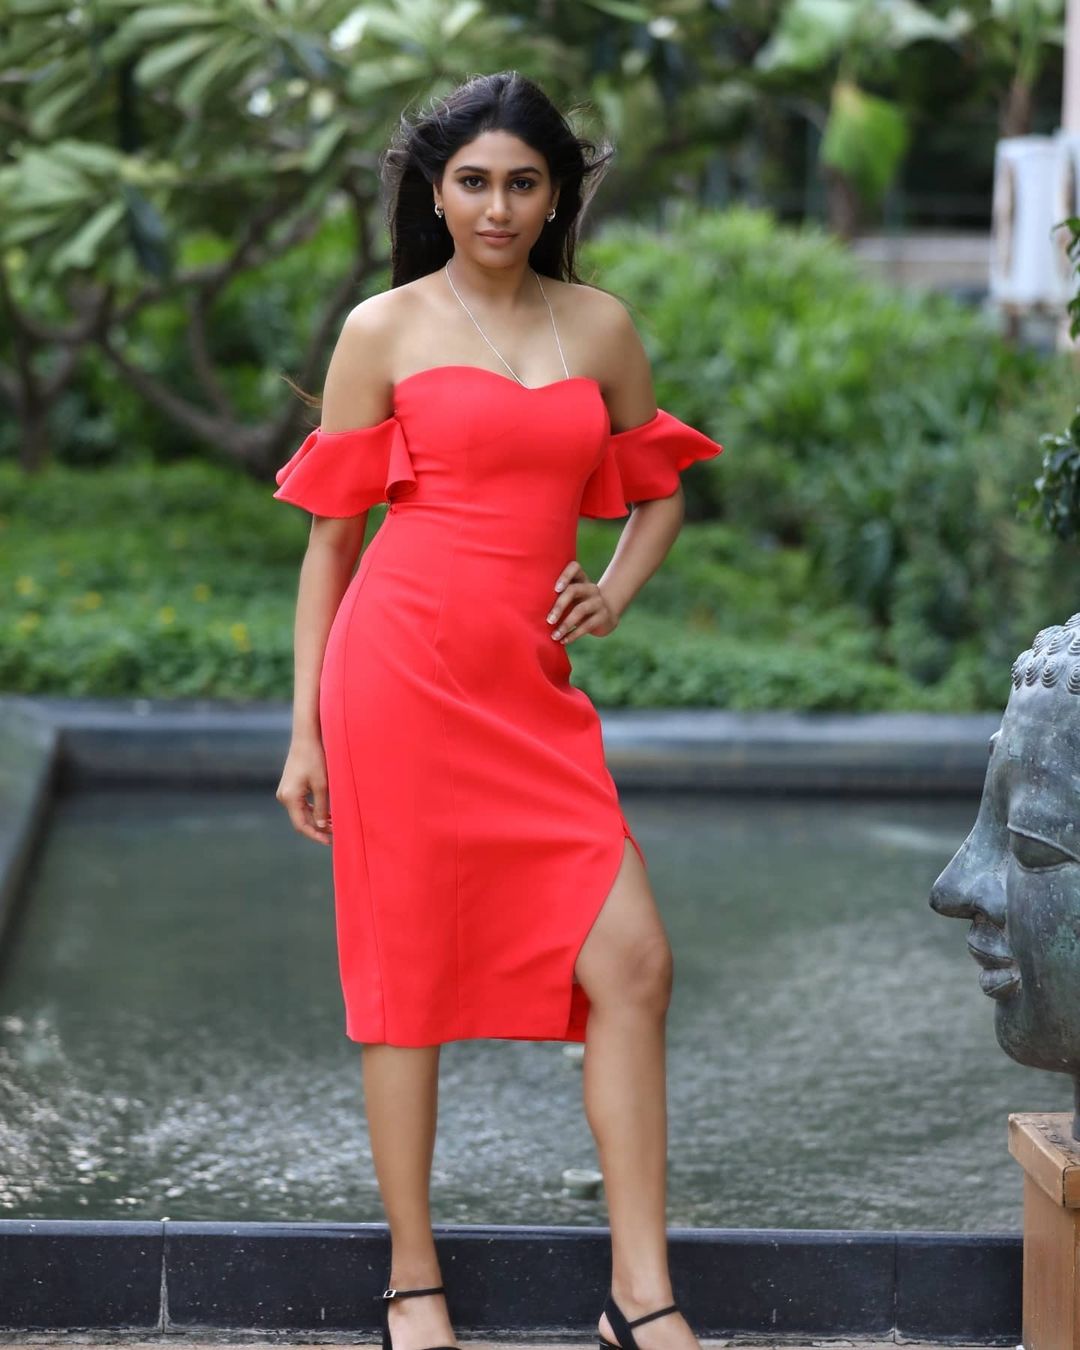 Hot Bae Manisha Yadav In Hot Red Off-Shoulder Bodycon Dress With Sweet Heart Neckline Effortless Look's & Outfits